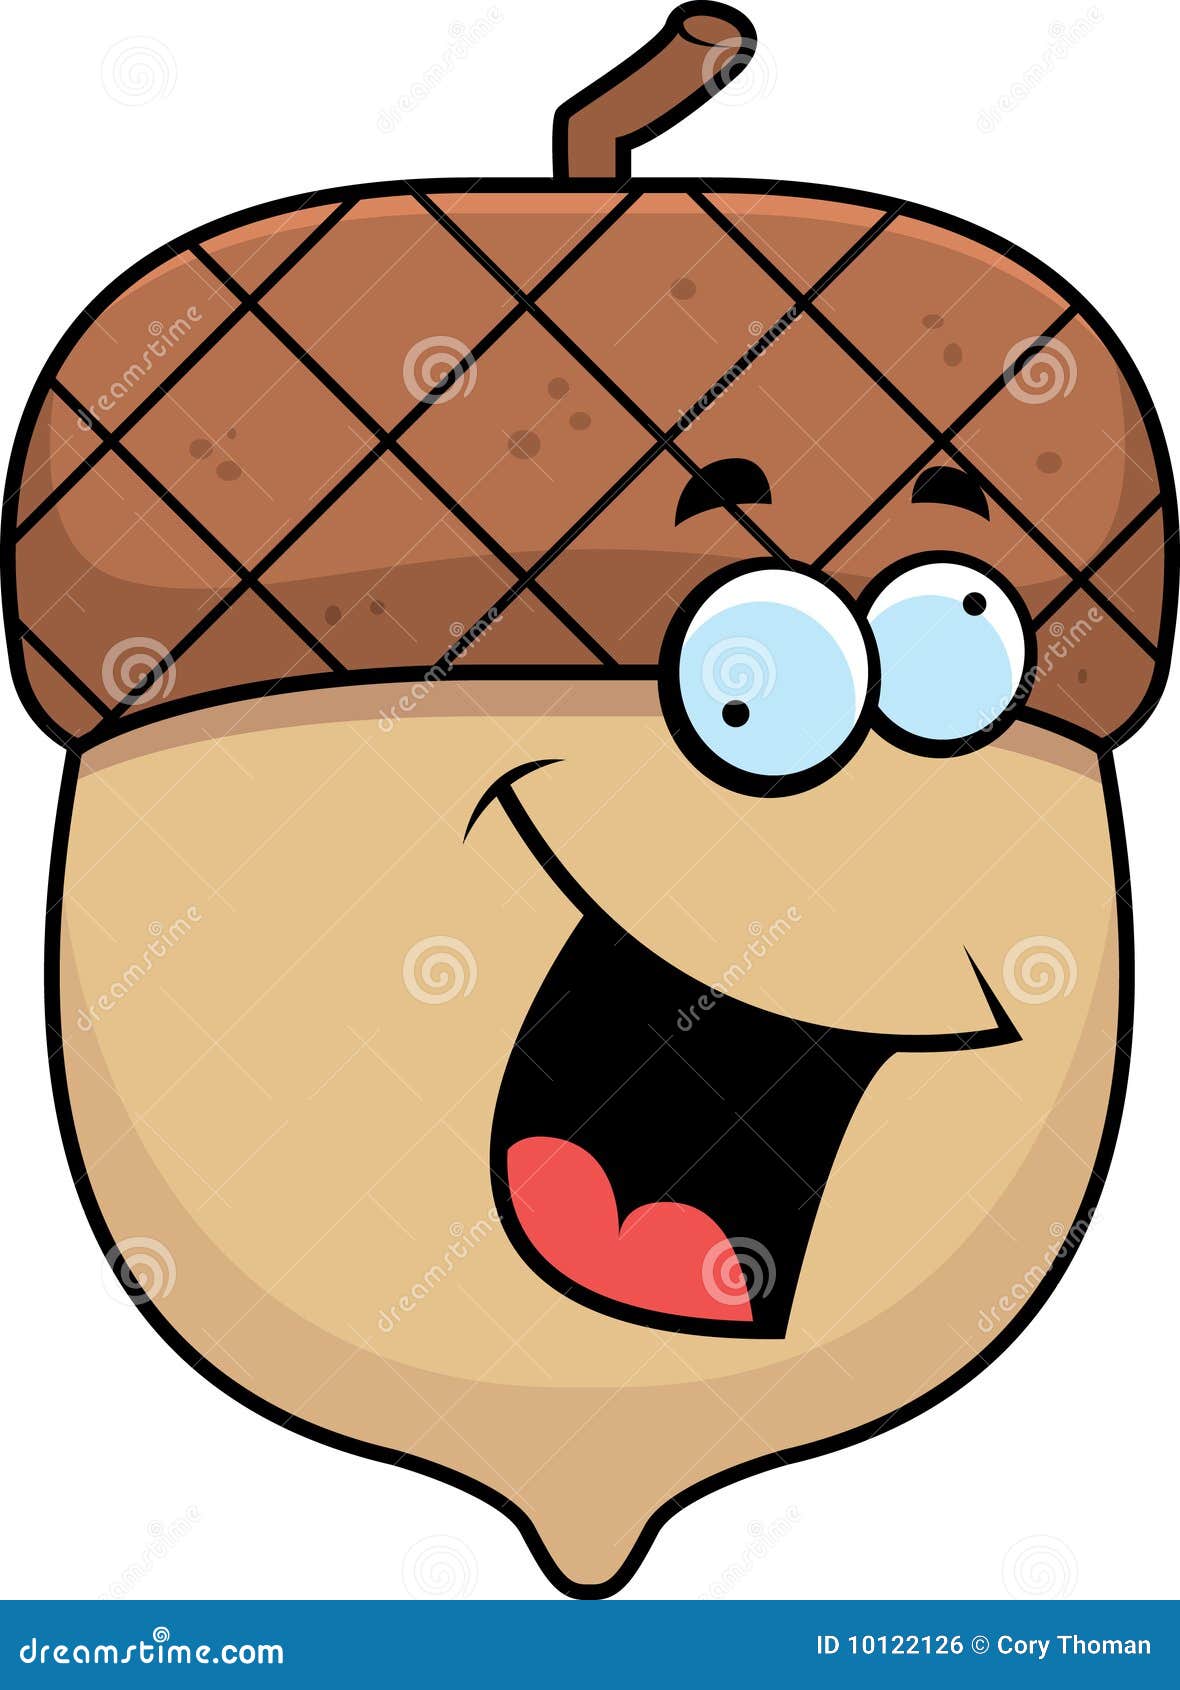 clipart of nuts - photo #50